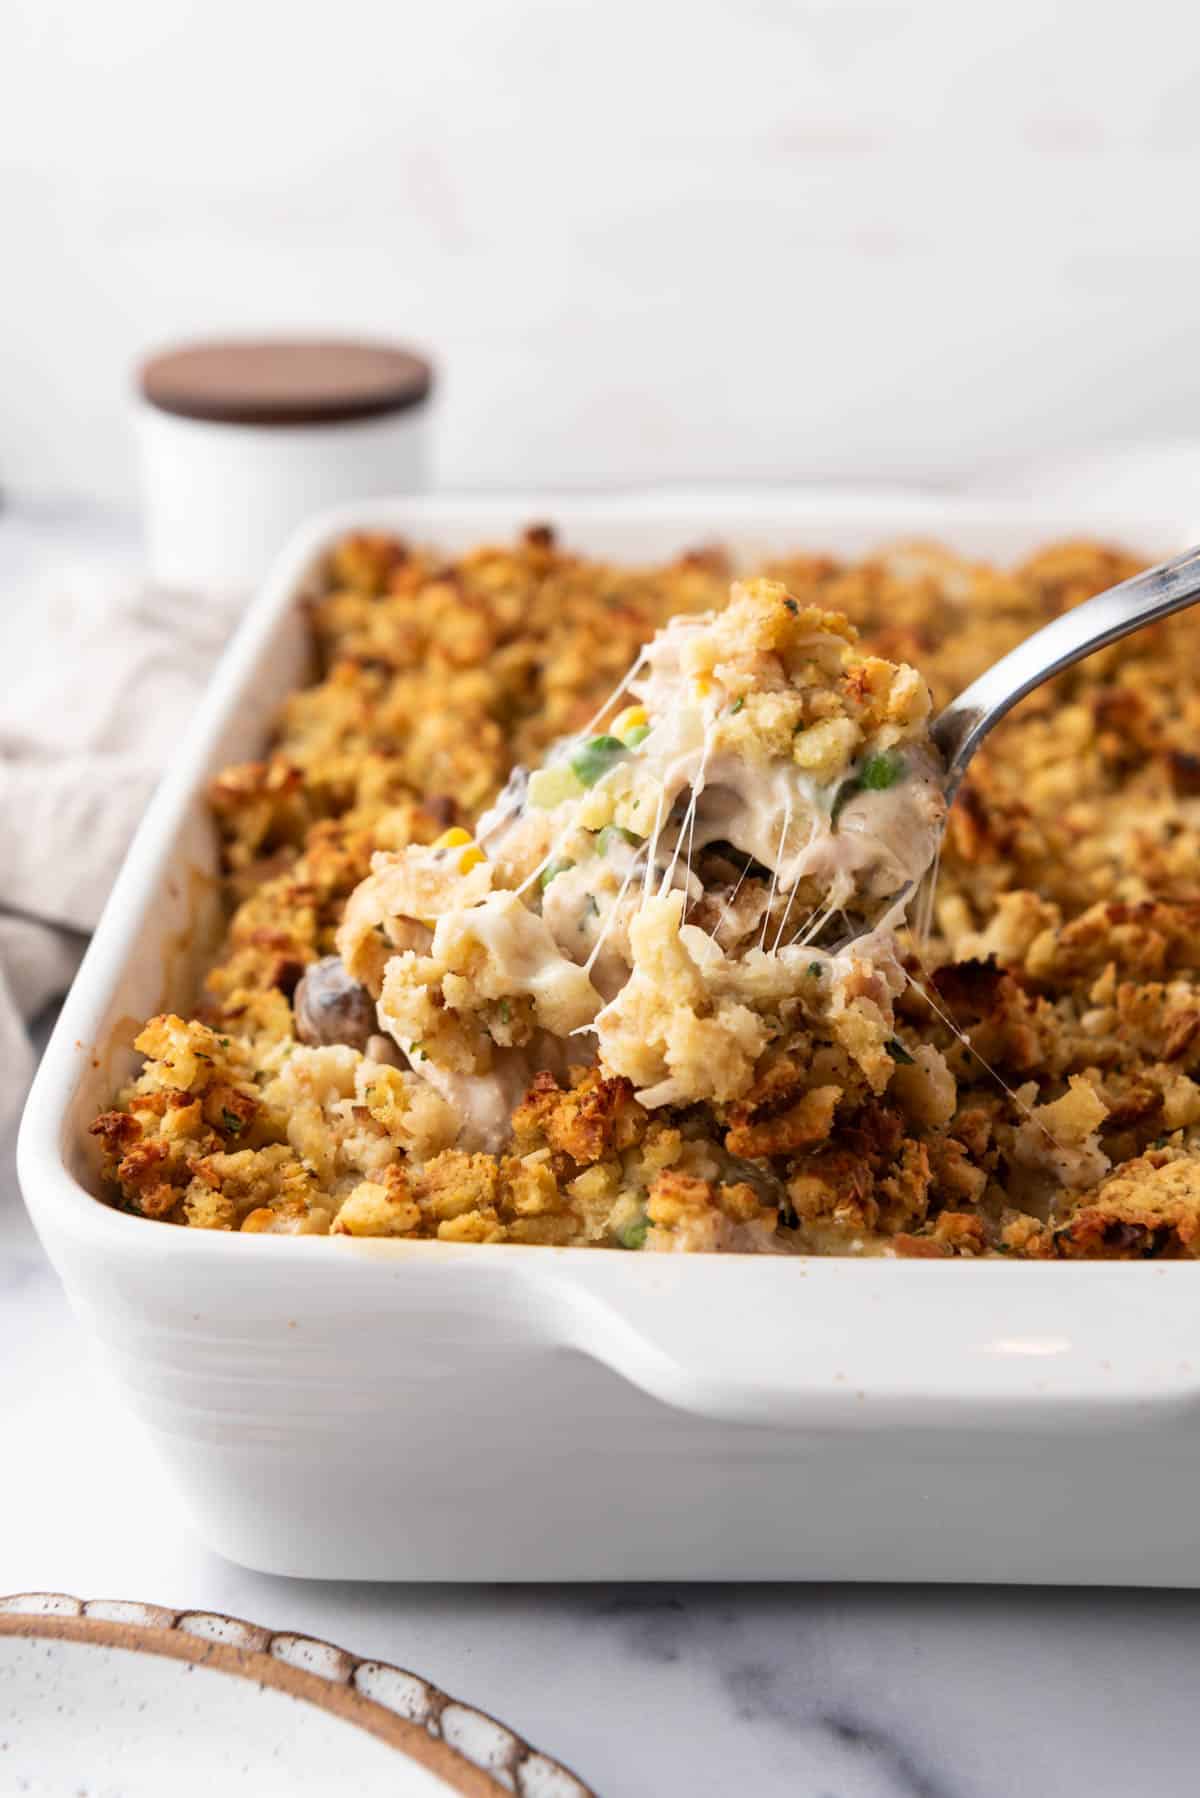 An image of a scoop of chicken and stuffing casserole being lifted out of the baking dish.